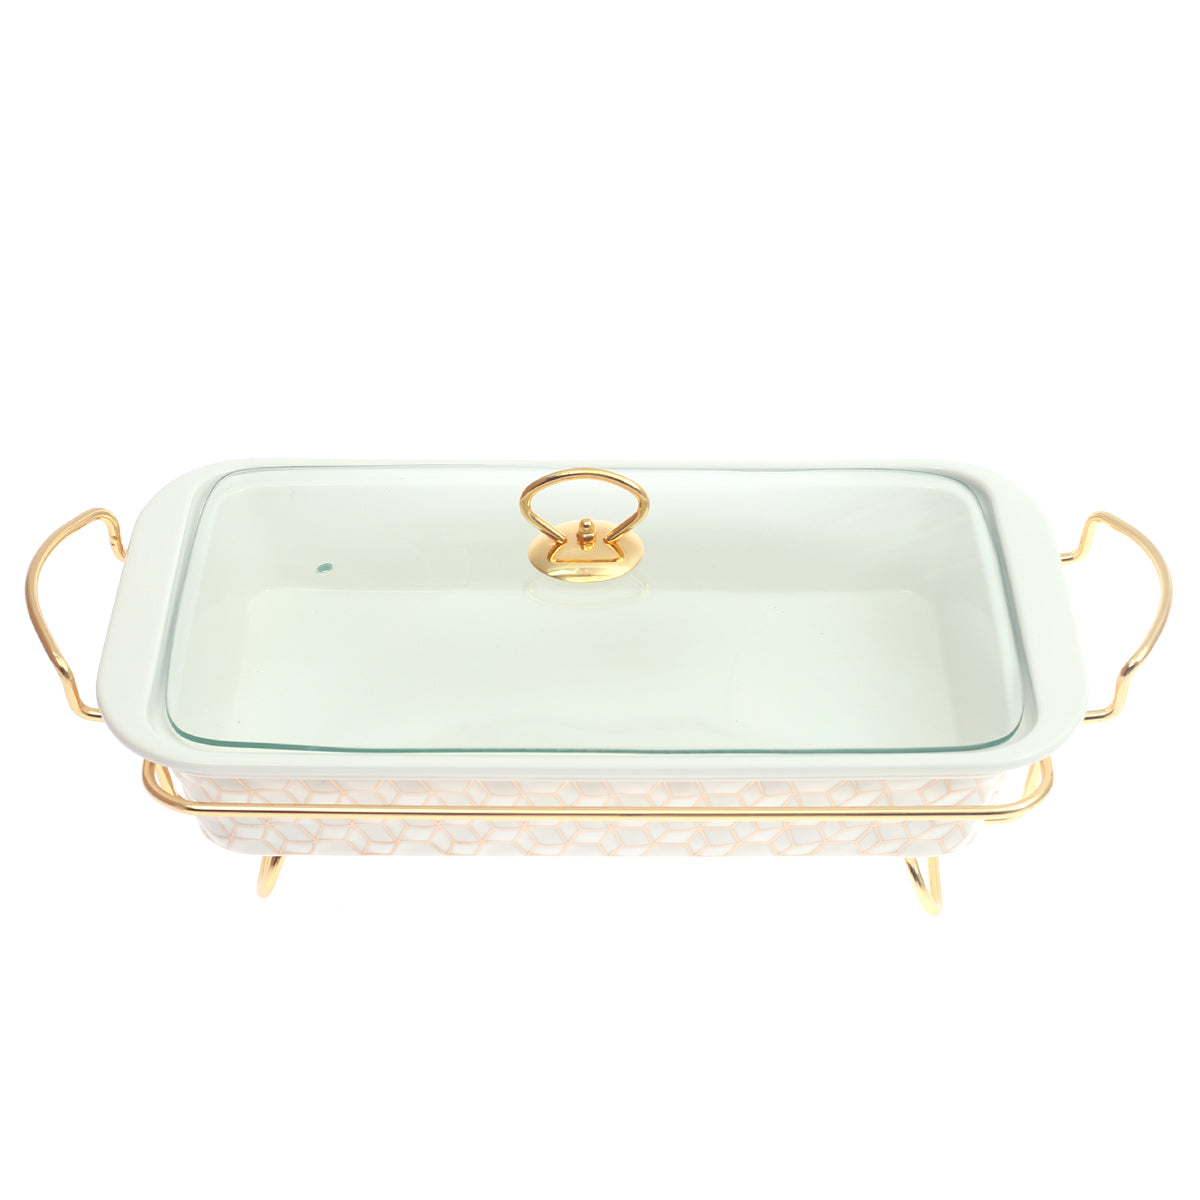 BR0148 16.5INCH RECT CASSEROLE + STAND